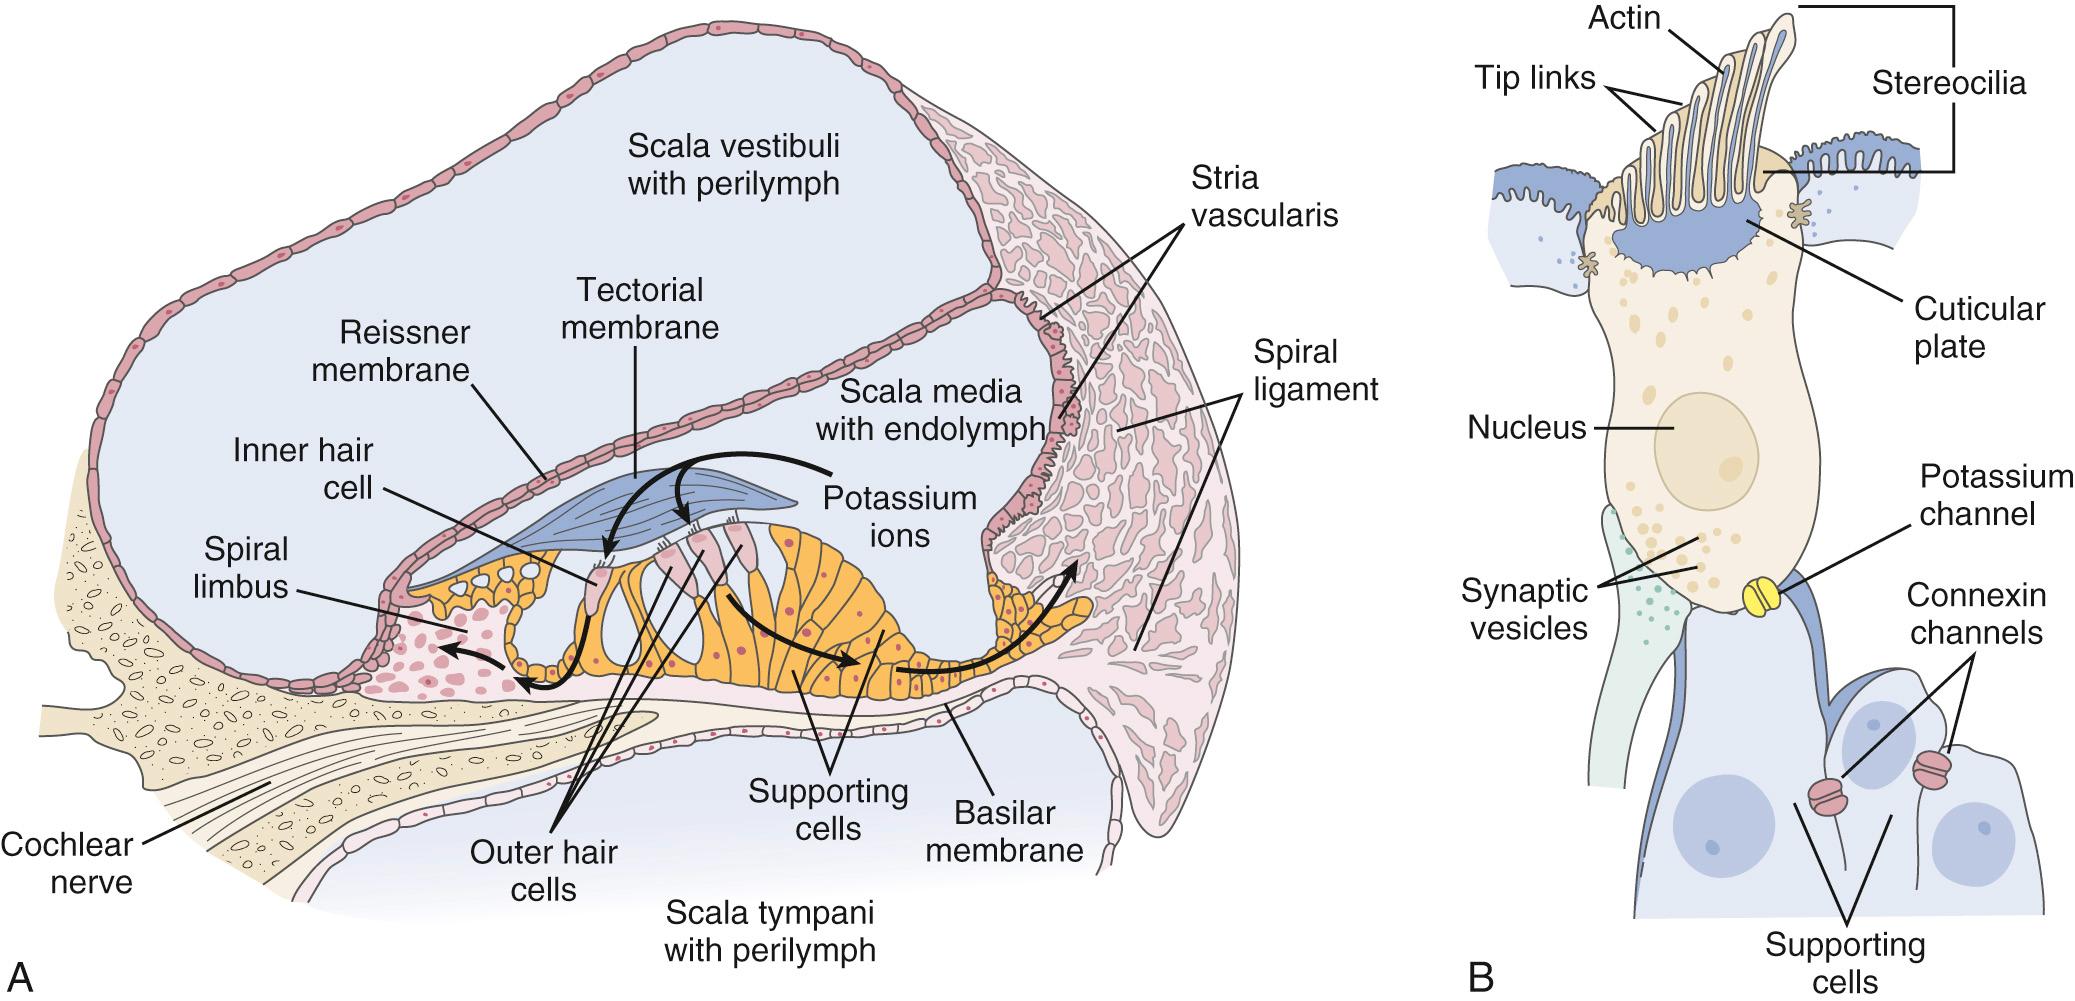 Fig. 128.4, Mechanoelectrical transduction of the auditory signal depends on the recycling of potassium ions in the organ of Corti. (A) Schematic cross-sectional view of the human cochlea. The scala media (cochlear duct) is filled with endolymph, and the scala vestibuli and tympani are filled with perilymph. The endolymph of the scala media bathes the organ of Corti, located between the basilar and tectorial membranes and containing the inner and outer hair cells. A relatively high concentration of potassium in the endolymph of the scala media relative to the hair cell creates a cation gradient maintained by the activity of the epithelial supporting cells, spiral ligament, and stria vascularis. (B) Cells contain stereocilia along their apical surface and are connected by tip links. The potassium gradient is essential to enable depolarization of the hair cell following influx of potassium ions in response to mechanical vibration of the basilar membrane, deflection of stereocilia, displacement of tip links, and opening of gated potassium channels. Depolarization results in calcium influx through channels along the basolateral membrane of the hair cell, which causes degranulation of neurotransmitter vesicles into the synaptic terminal and propagates an action potential along the auditory nerve. Gap junction proteins between the hair cells (potassium channel, yellow ) and epithelial supporting cells (connexin channels, red ) allow for the flow of potassium ions back to the stria vascularis, where they are pumped back into the endolymph.